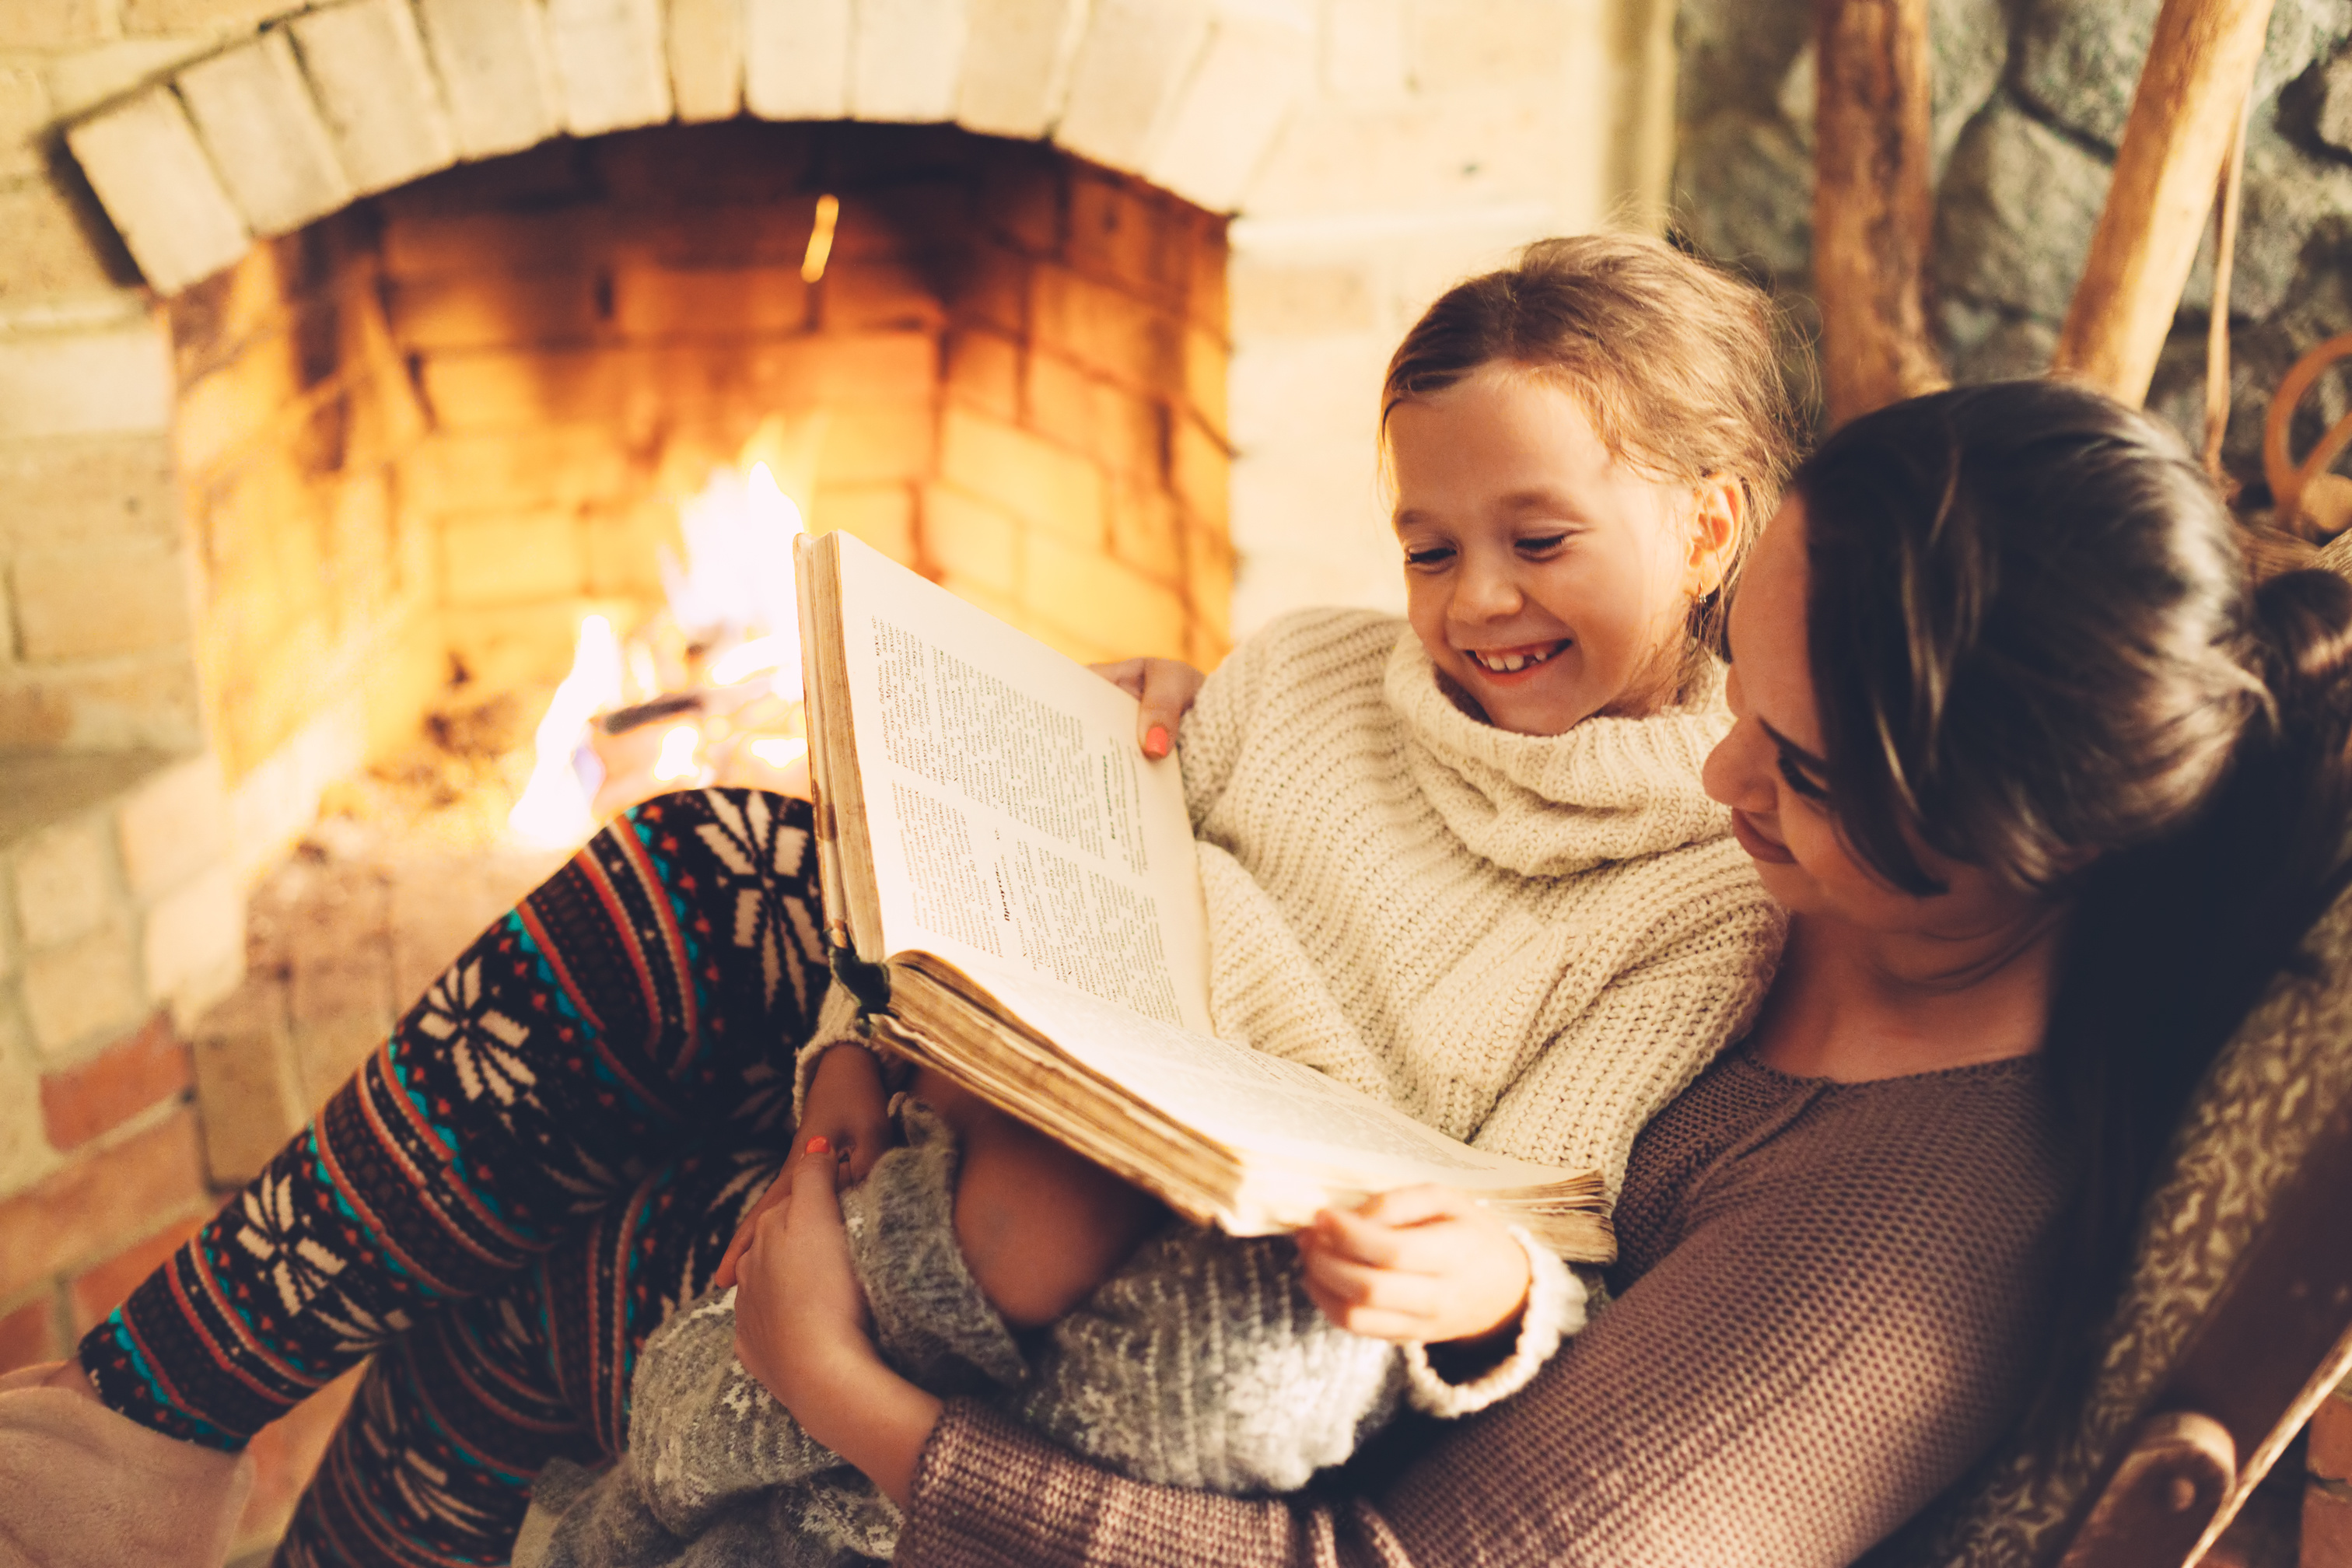 Mom with child reading book and relaxing by the fire place some cold evening, winter weekends, cozy scene